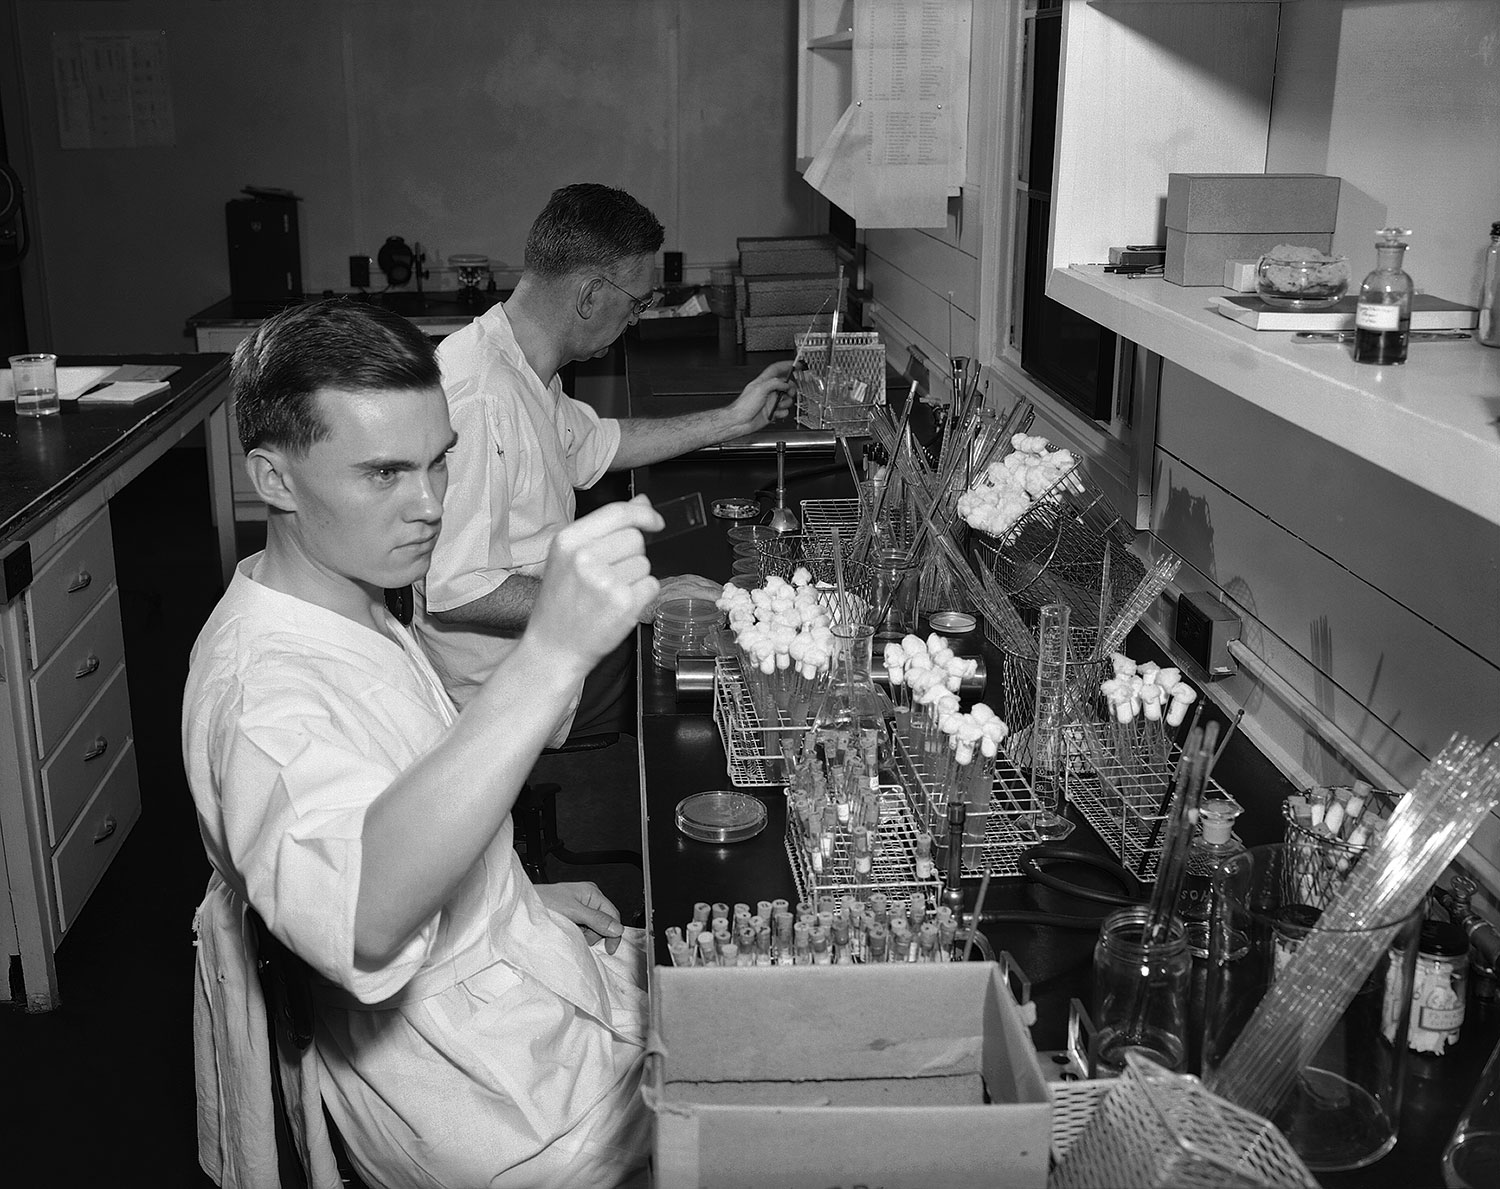 Dr. P.R. Edwards of the US Public Health Service seated in the background, and George Herman working in the Enteric Bacteriology Unit Laboratory. Dr. Edwards joined the staff of the Communicable Disease Center of the Public Health Service in 1948 and served as Chief of the Enteric Bacteriology Unit until June 1962, when he accepted the post of Chief of the Bacteriology Section at CDC. Image source: Public Health Image Library. 